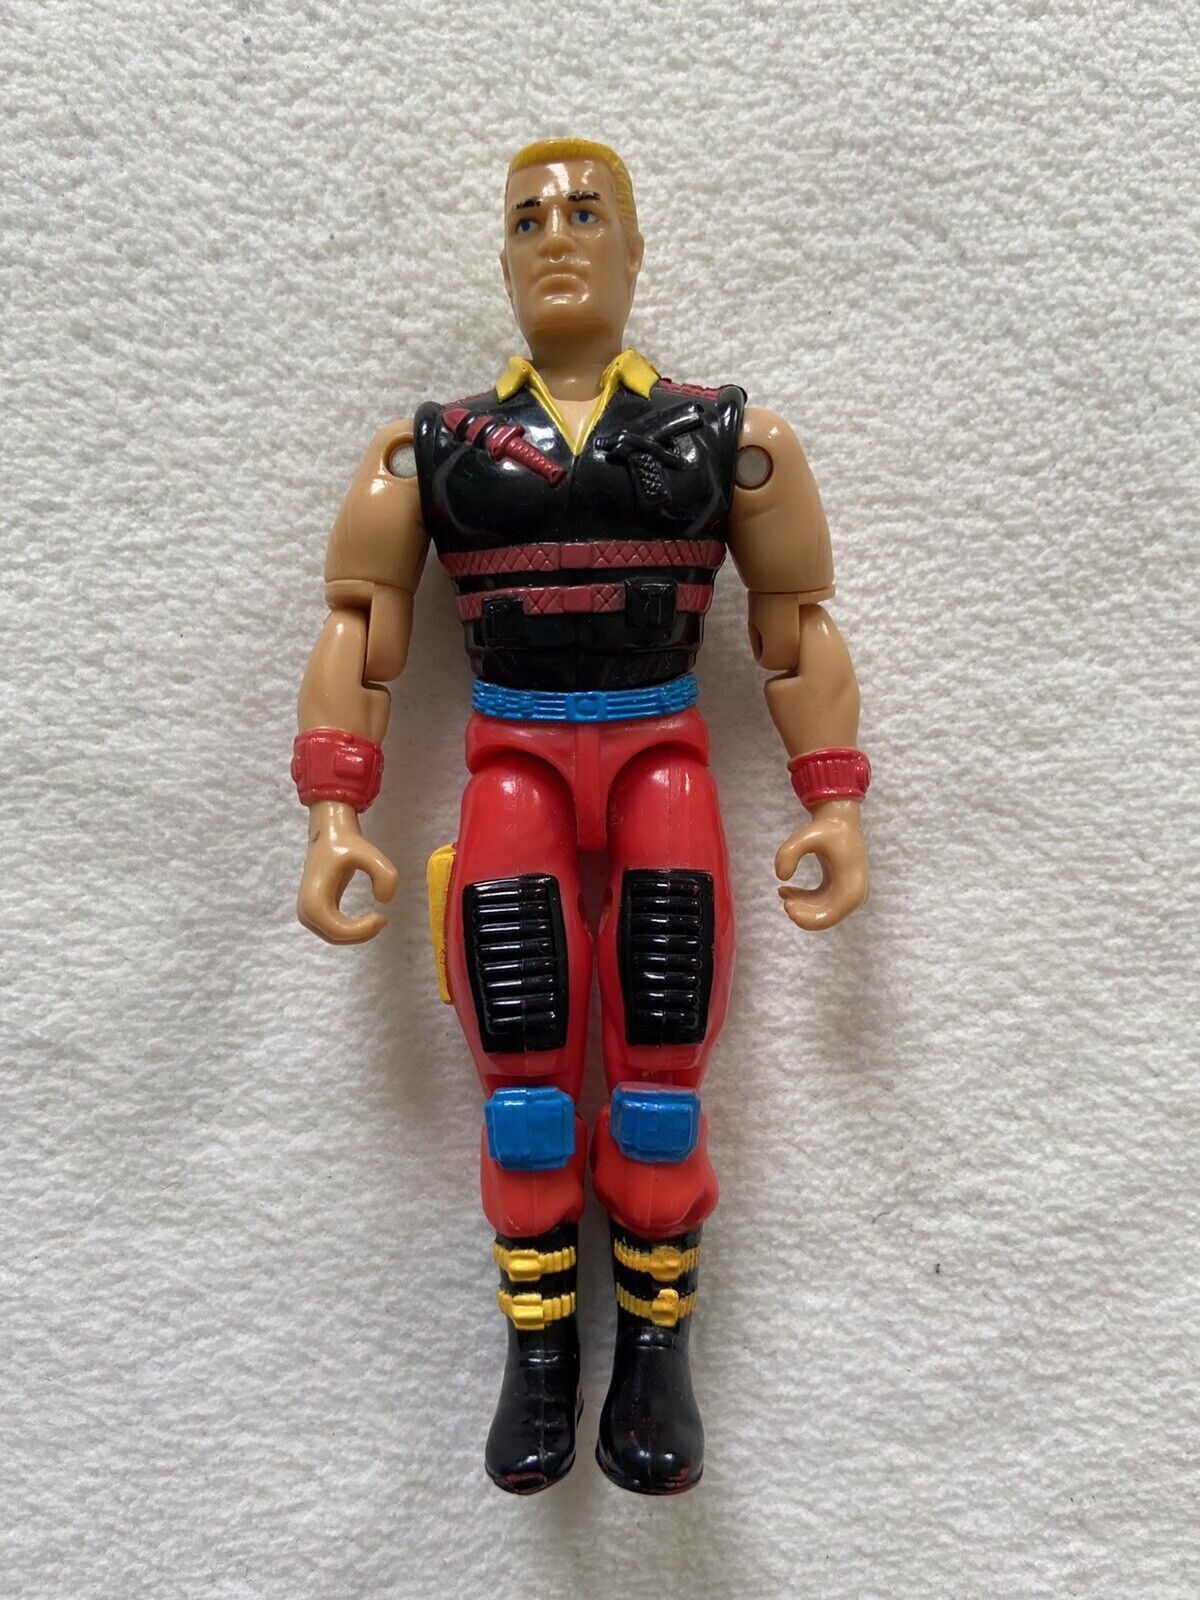 UNIFIGHTERS - Galoob 1990 Gr4e